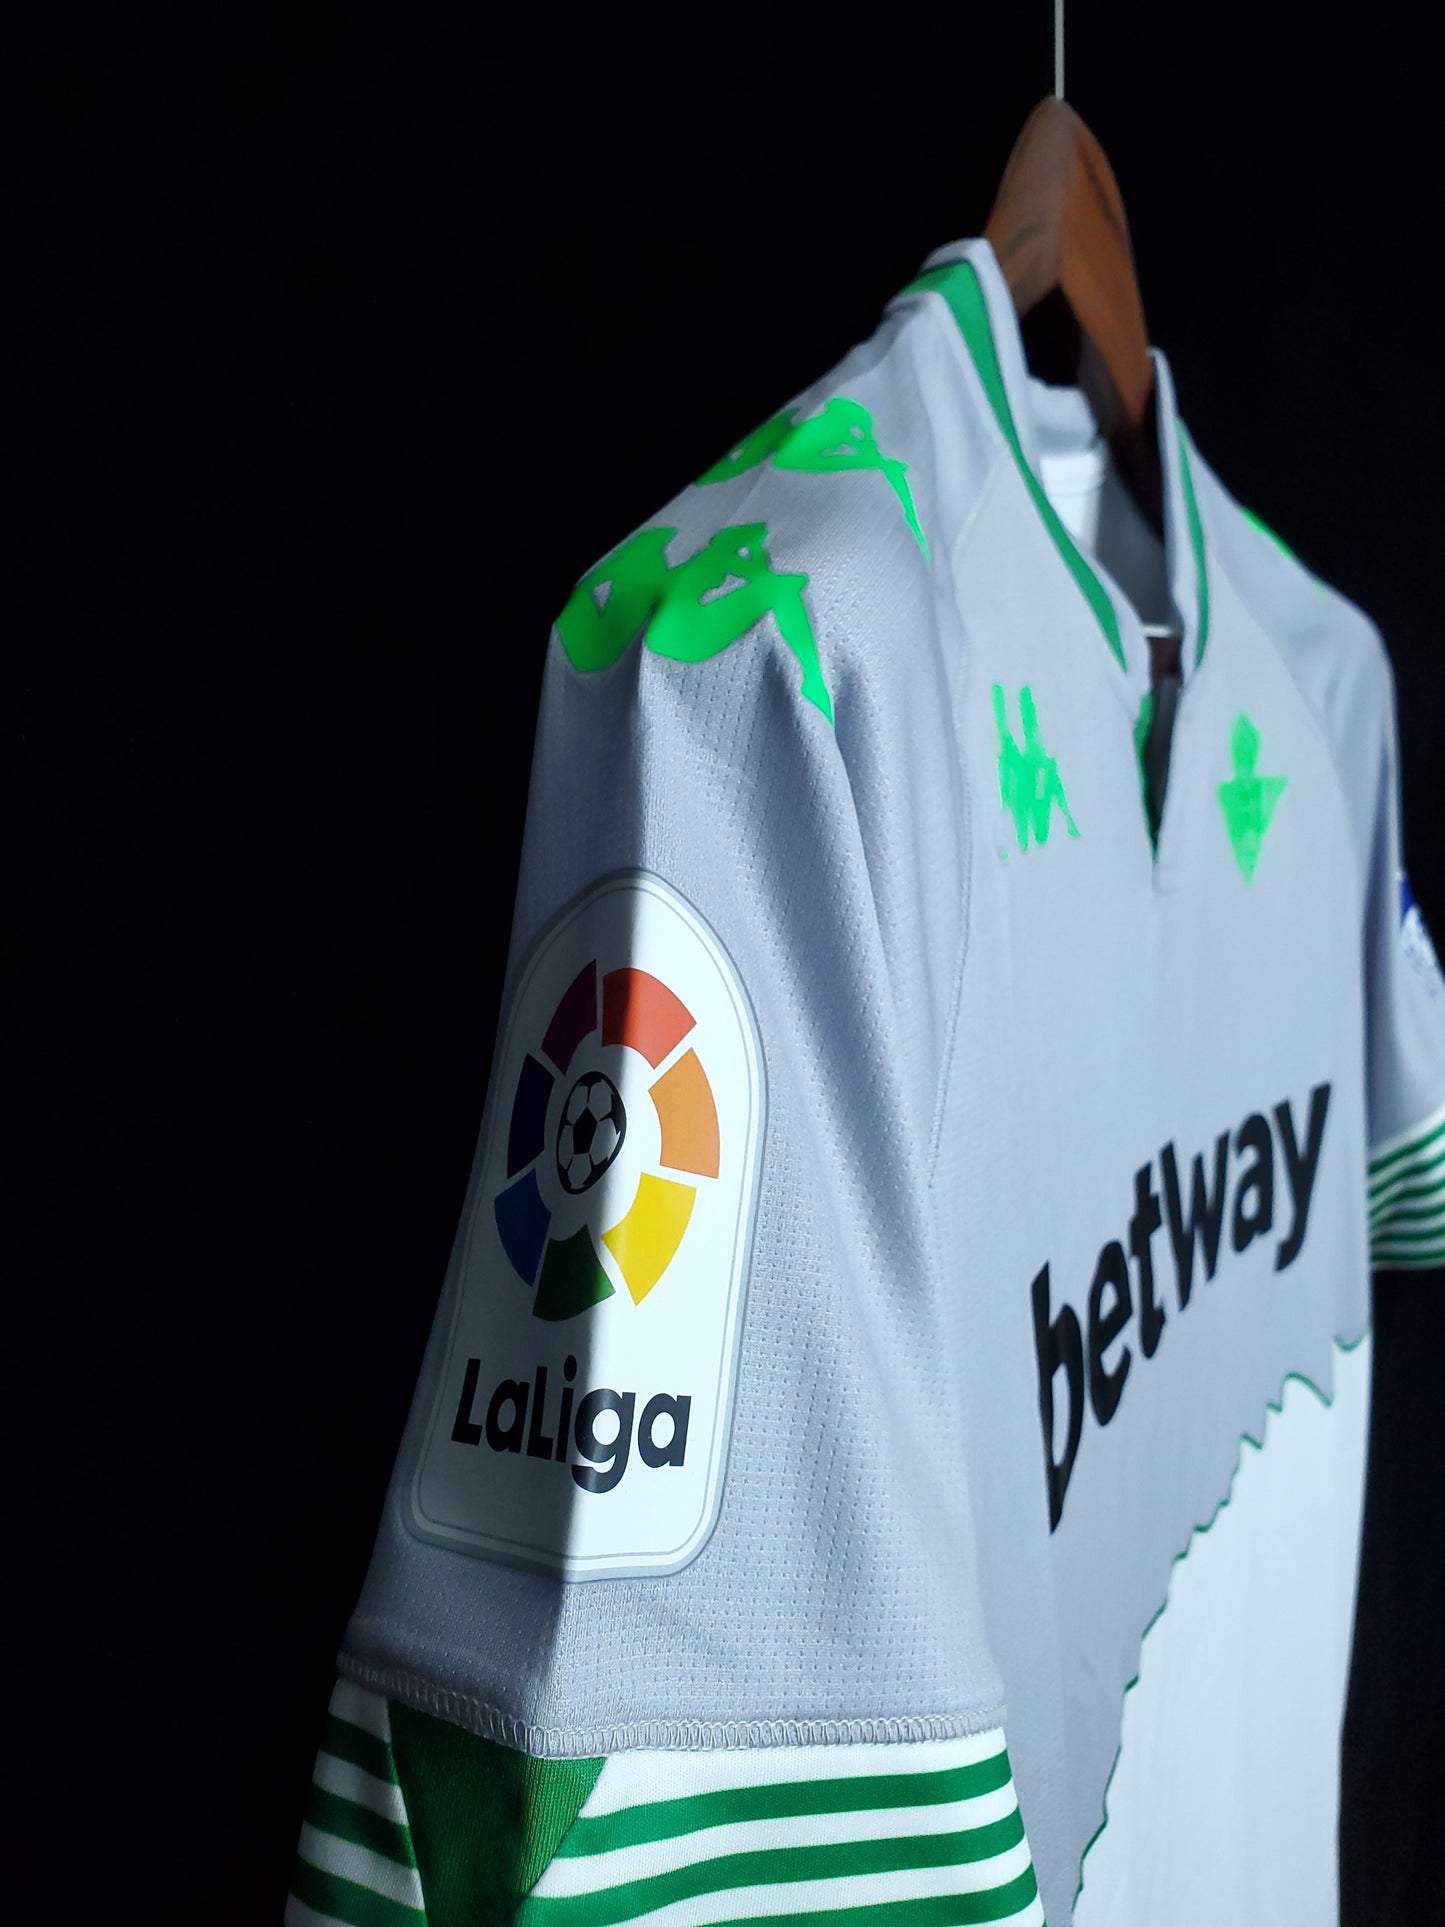 Real Betis Home Jersey